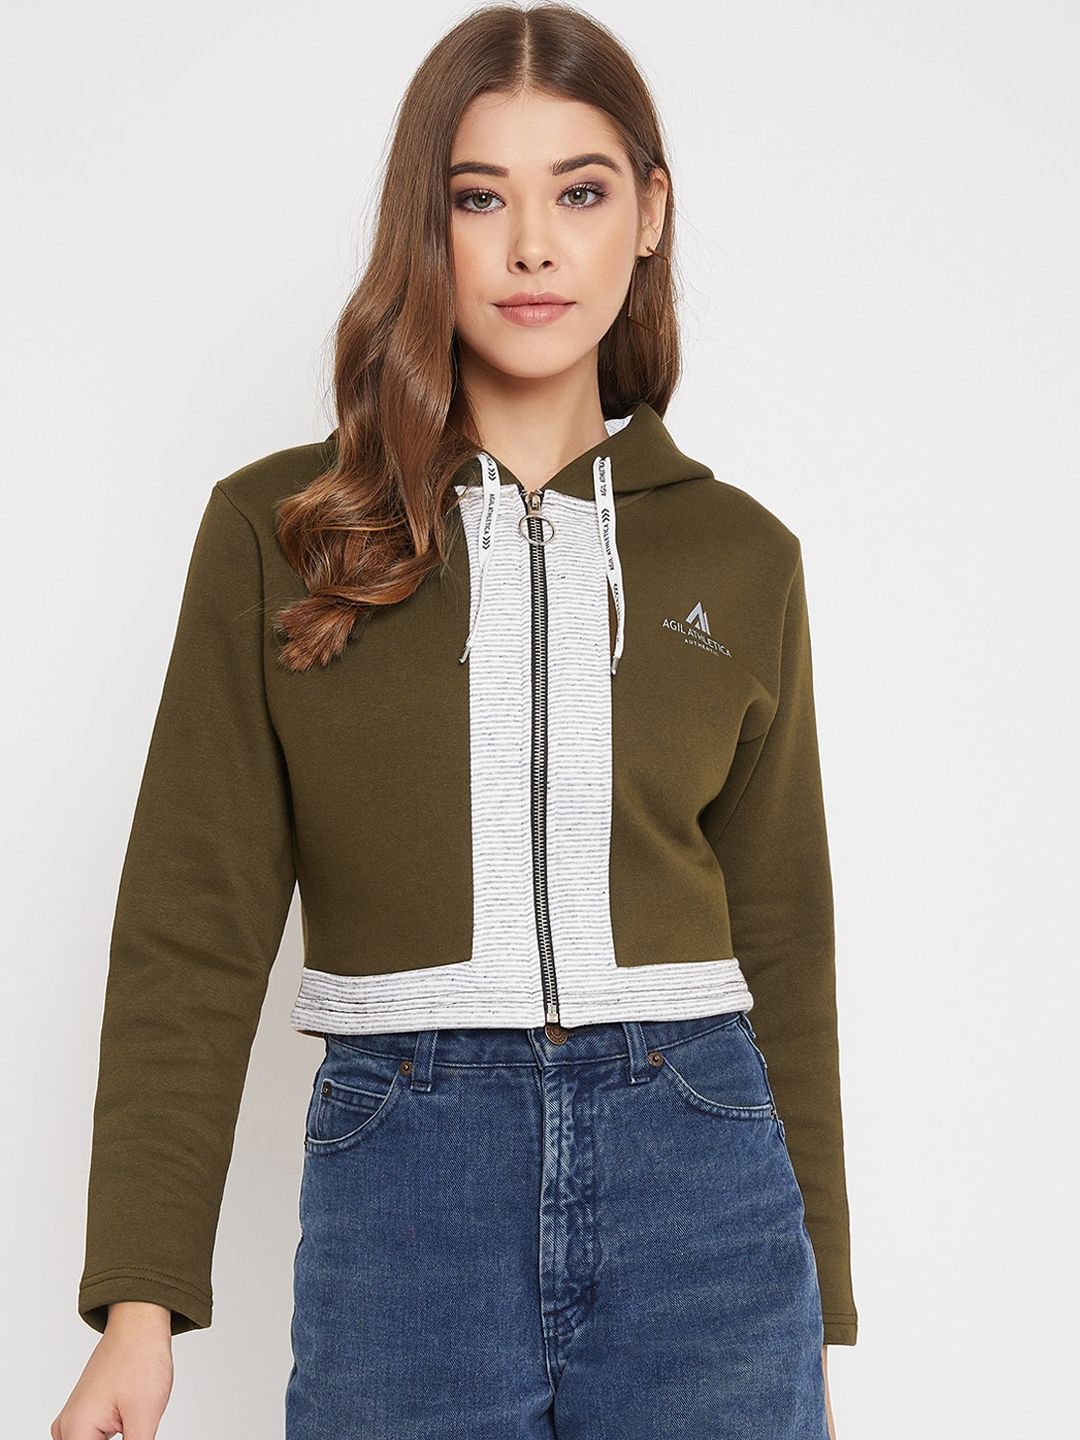 AGIL ATHLETICA Women Olive Green Solid Crop Tailored Jacket Price in India